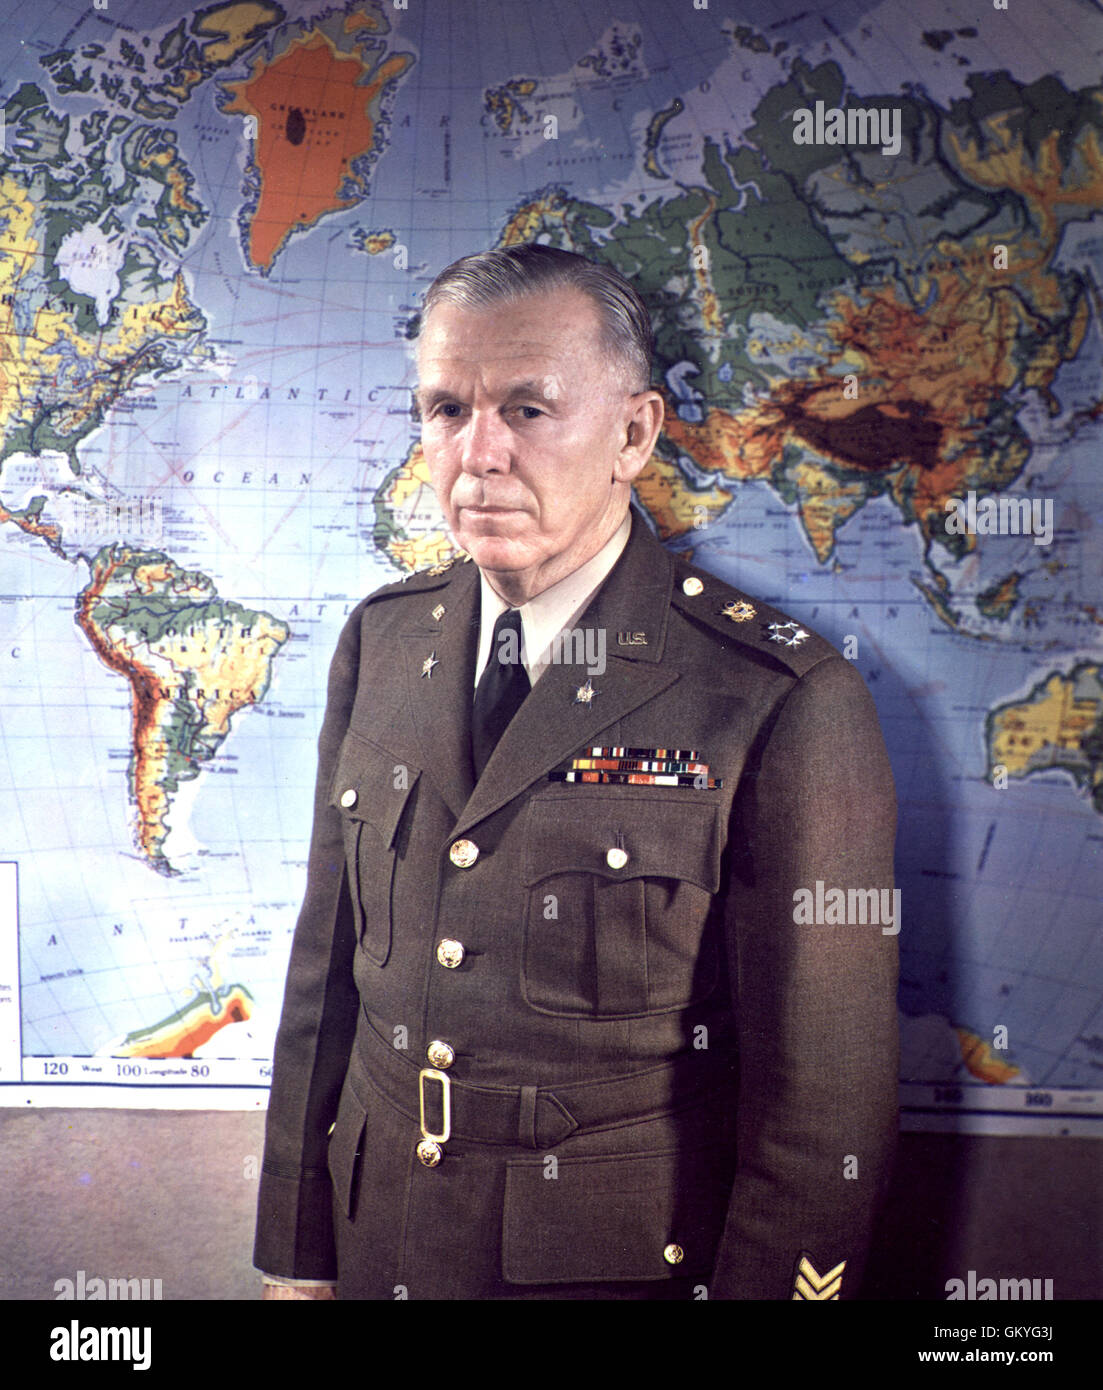 General George C. Marshall, General Of The Army Stockfoto